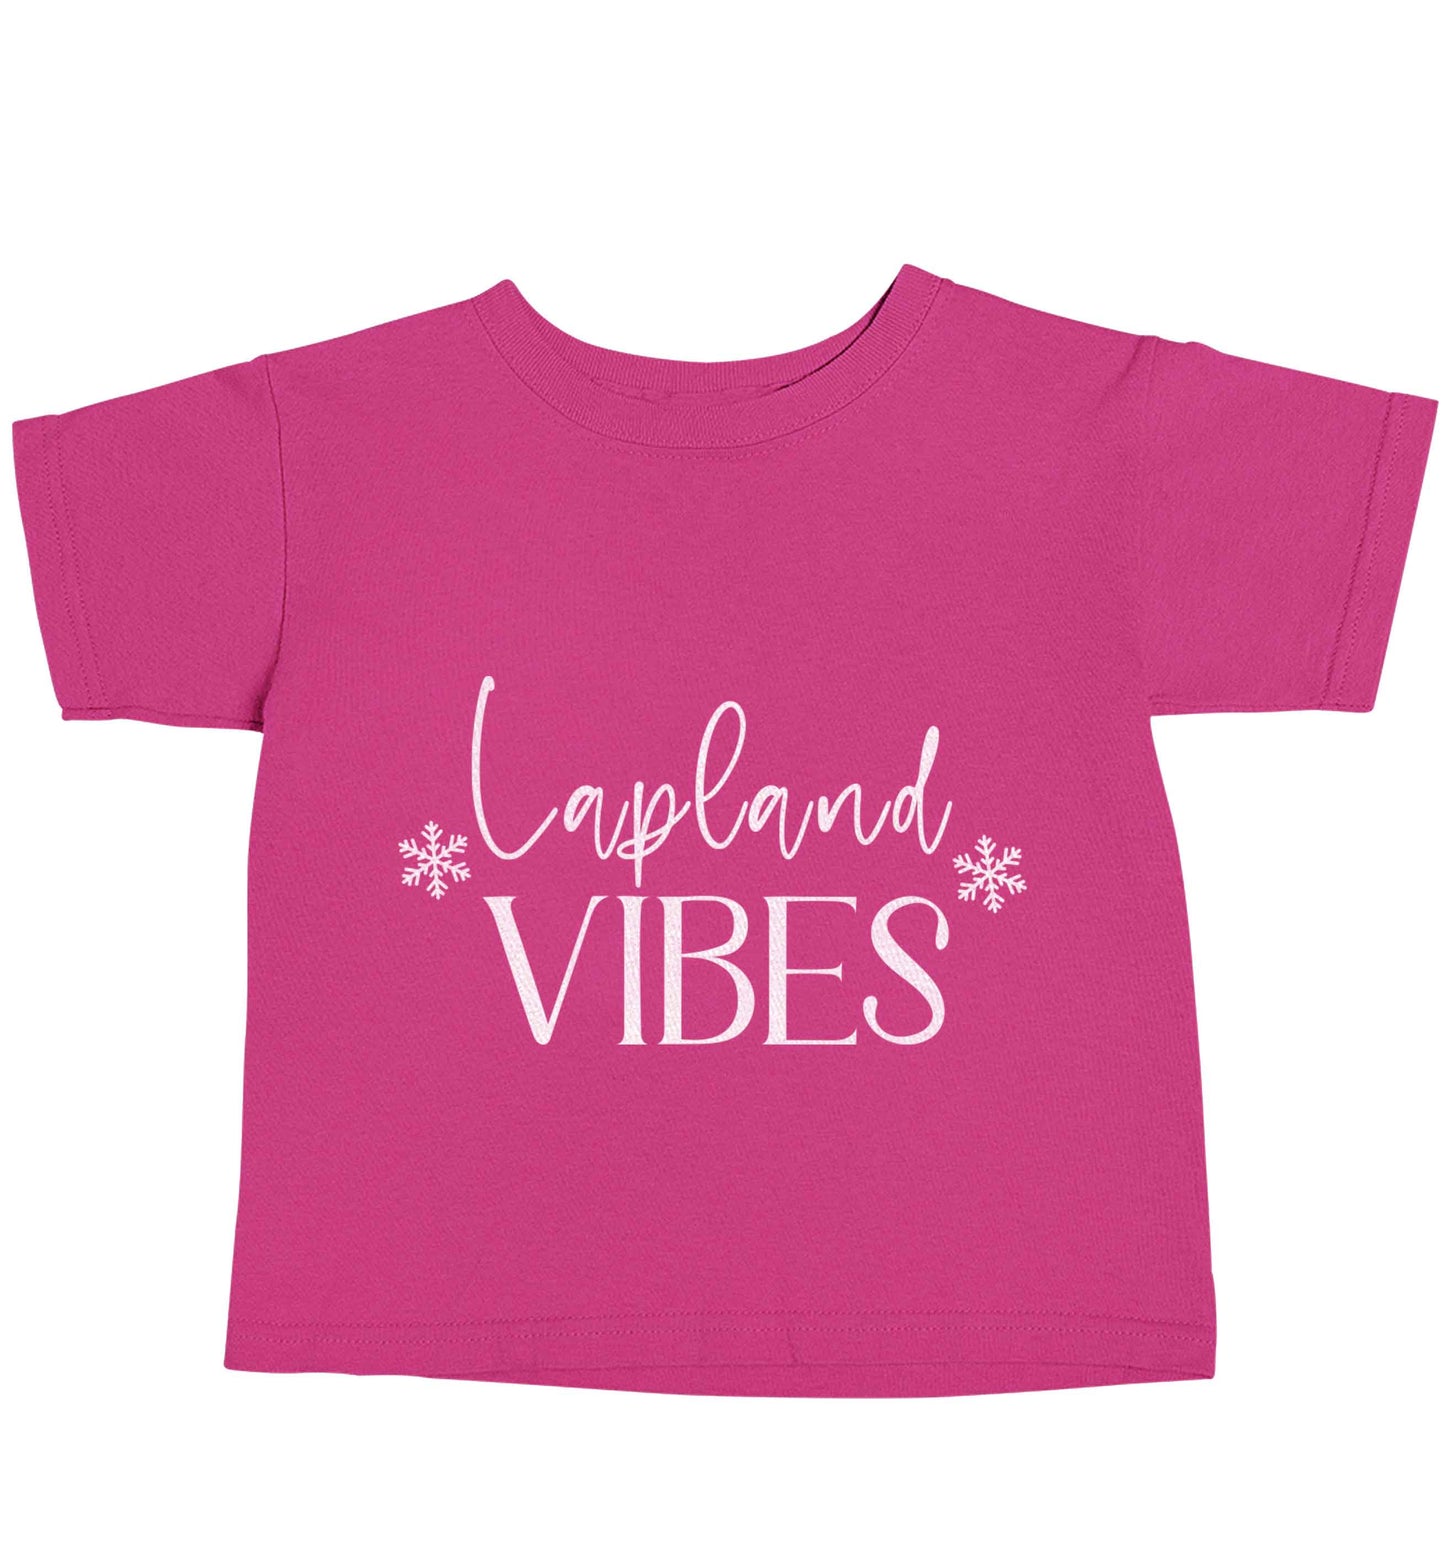 Lapland vibes pink baby toddler Tshirt 2 Years